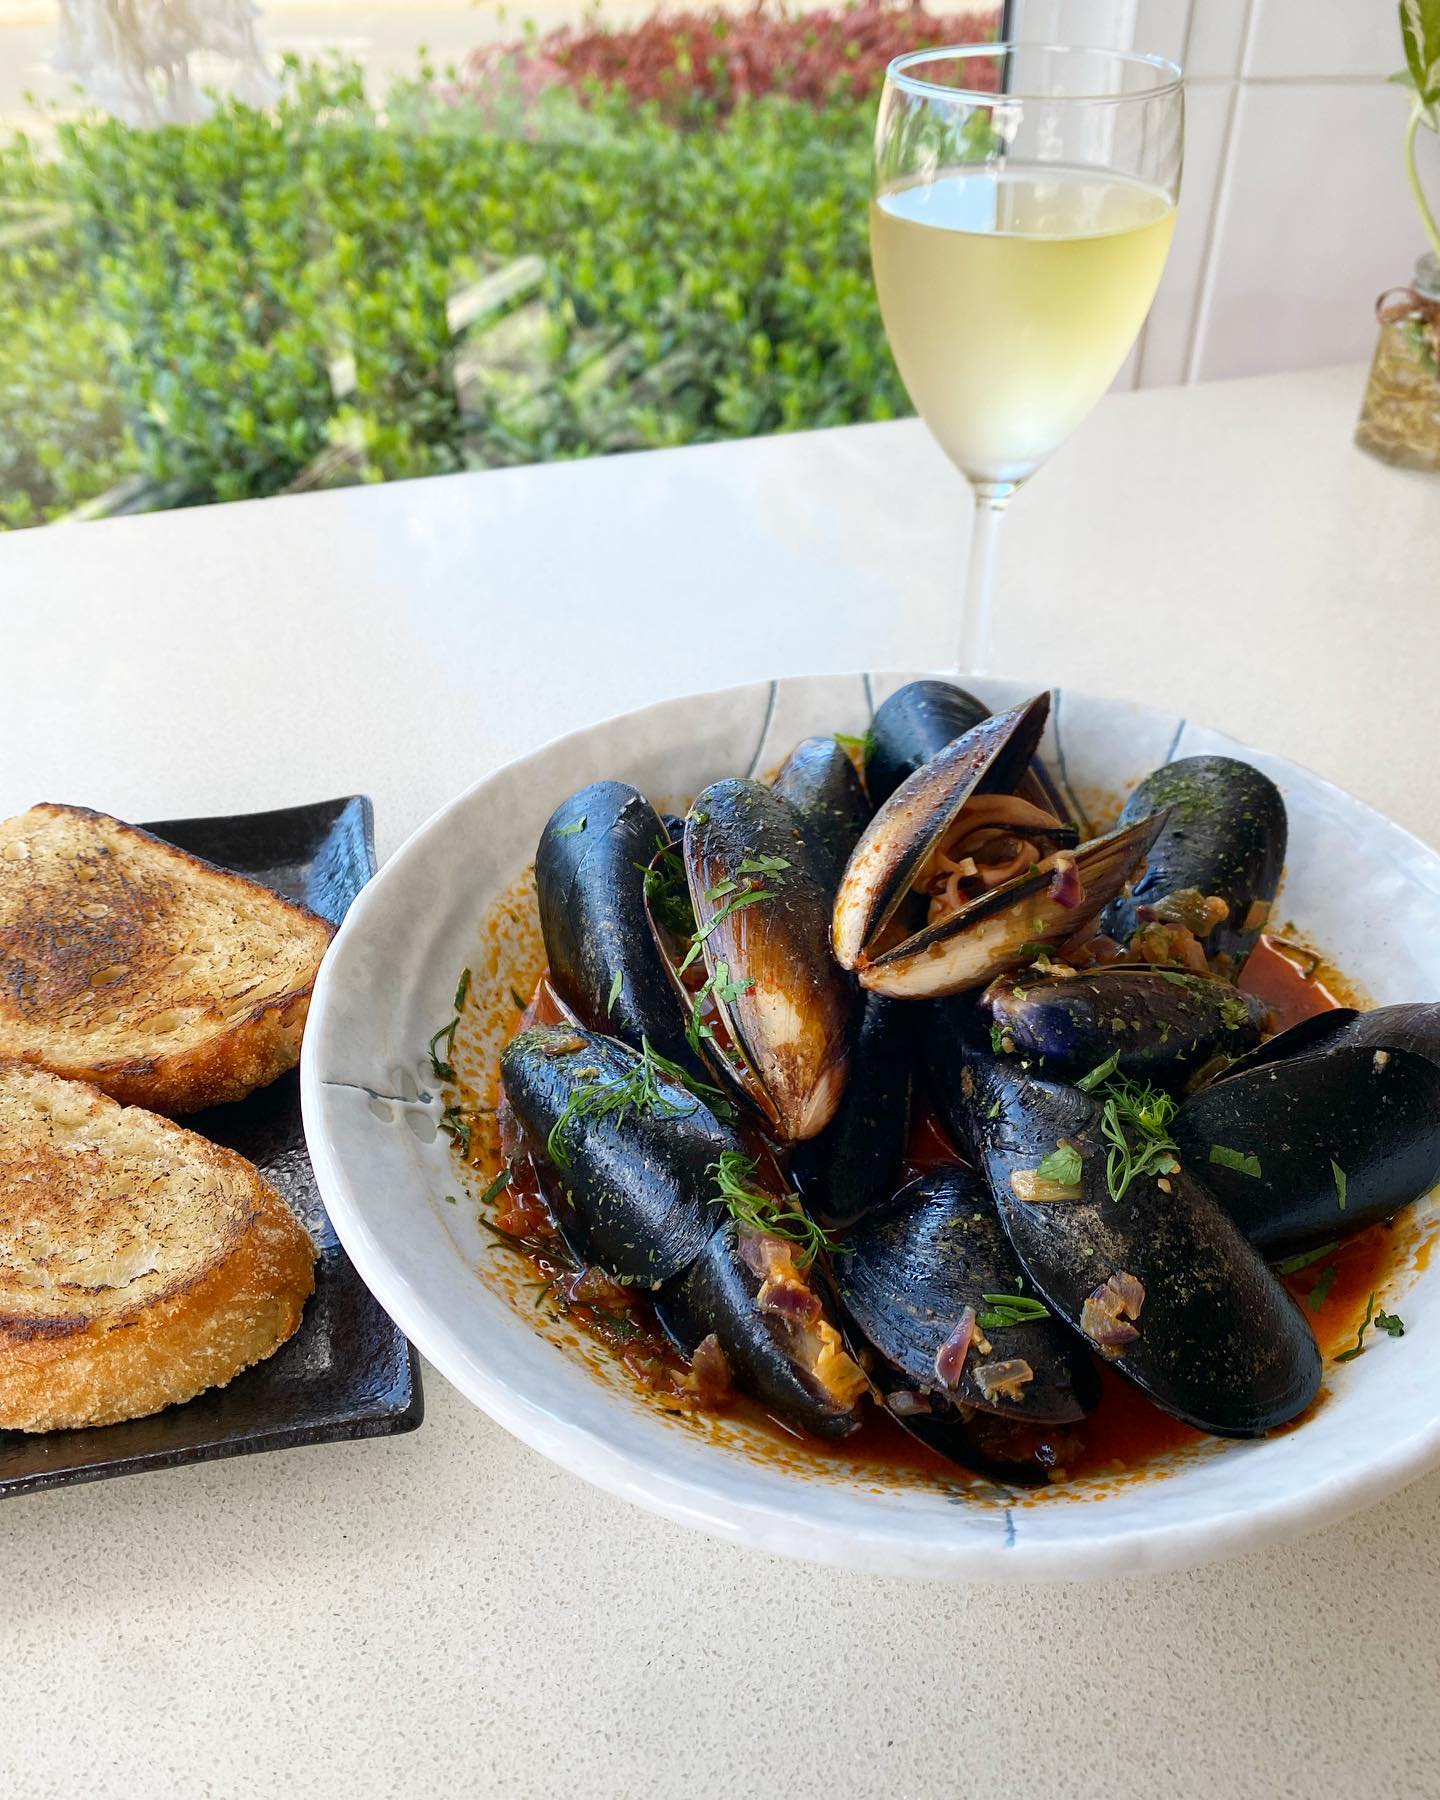 New special, check it out! Bowl of mussels with Pane di casa.
Salsa di pomodoro, Japanese dashi stock and Sake.
Enjoy until the very last drop!